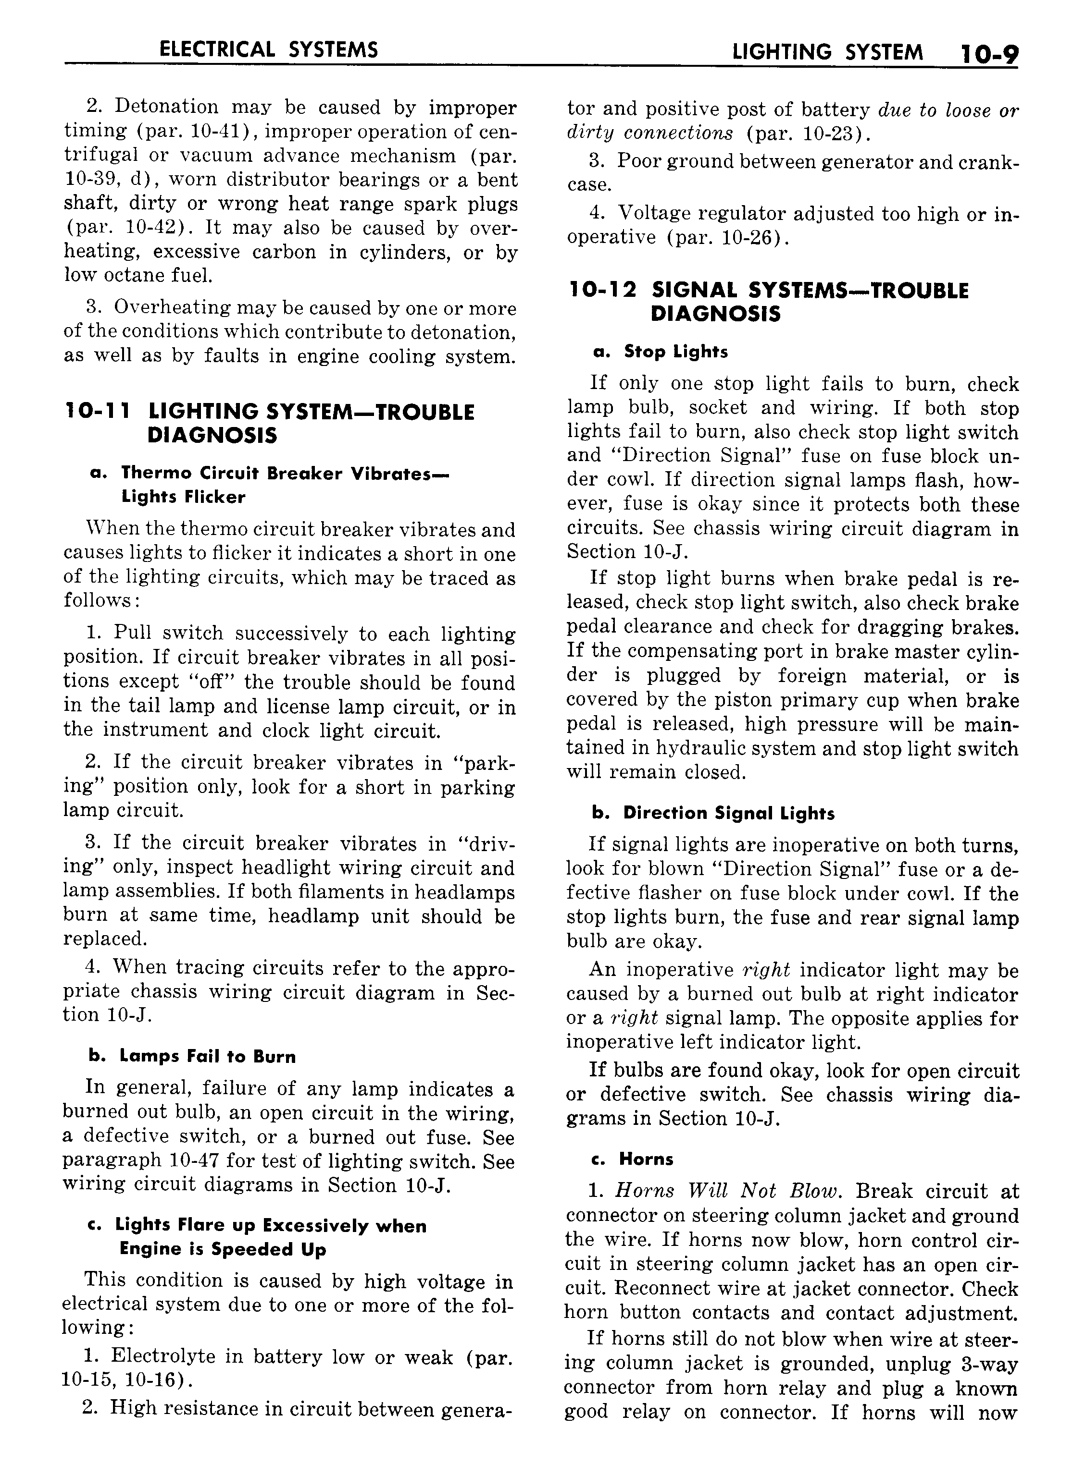 n_11 1957 Buick Shop Manual - Electrical Systems-009-009.jpg